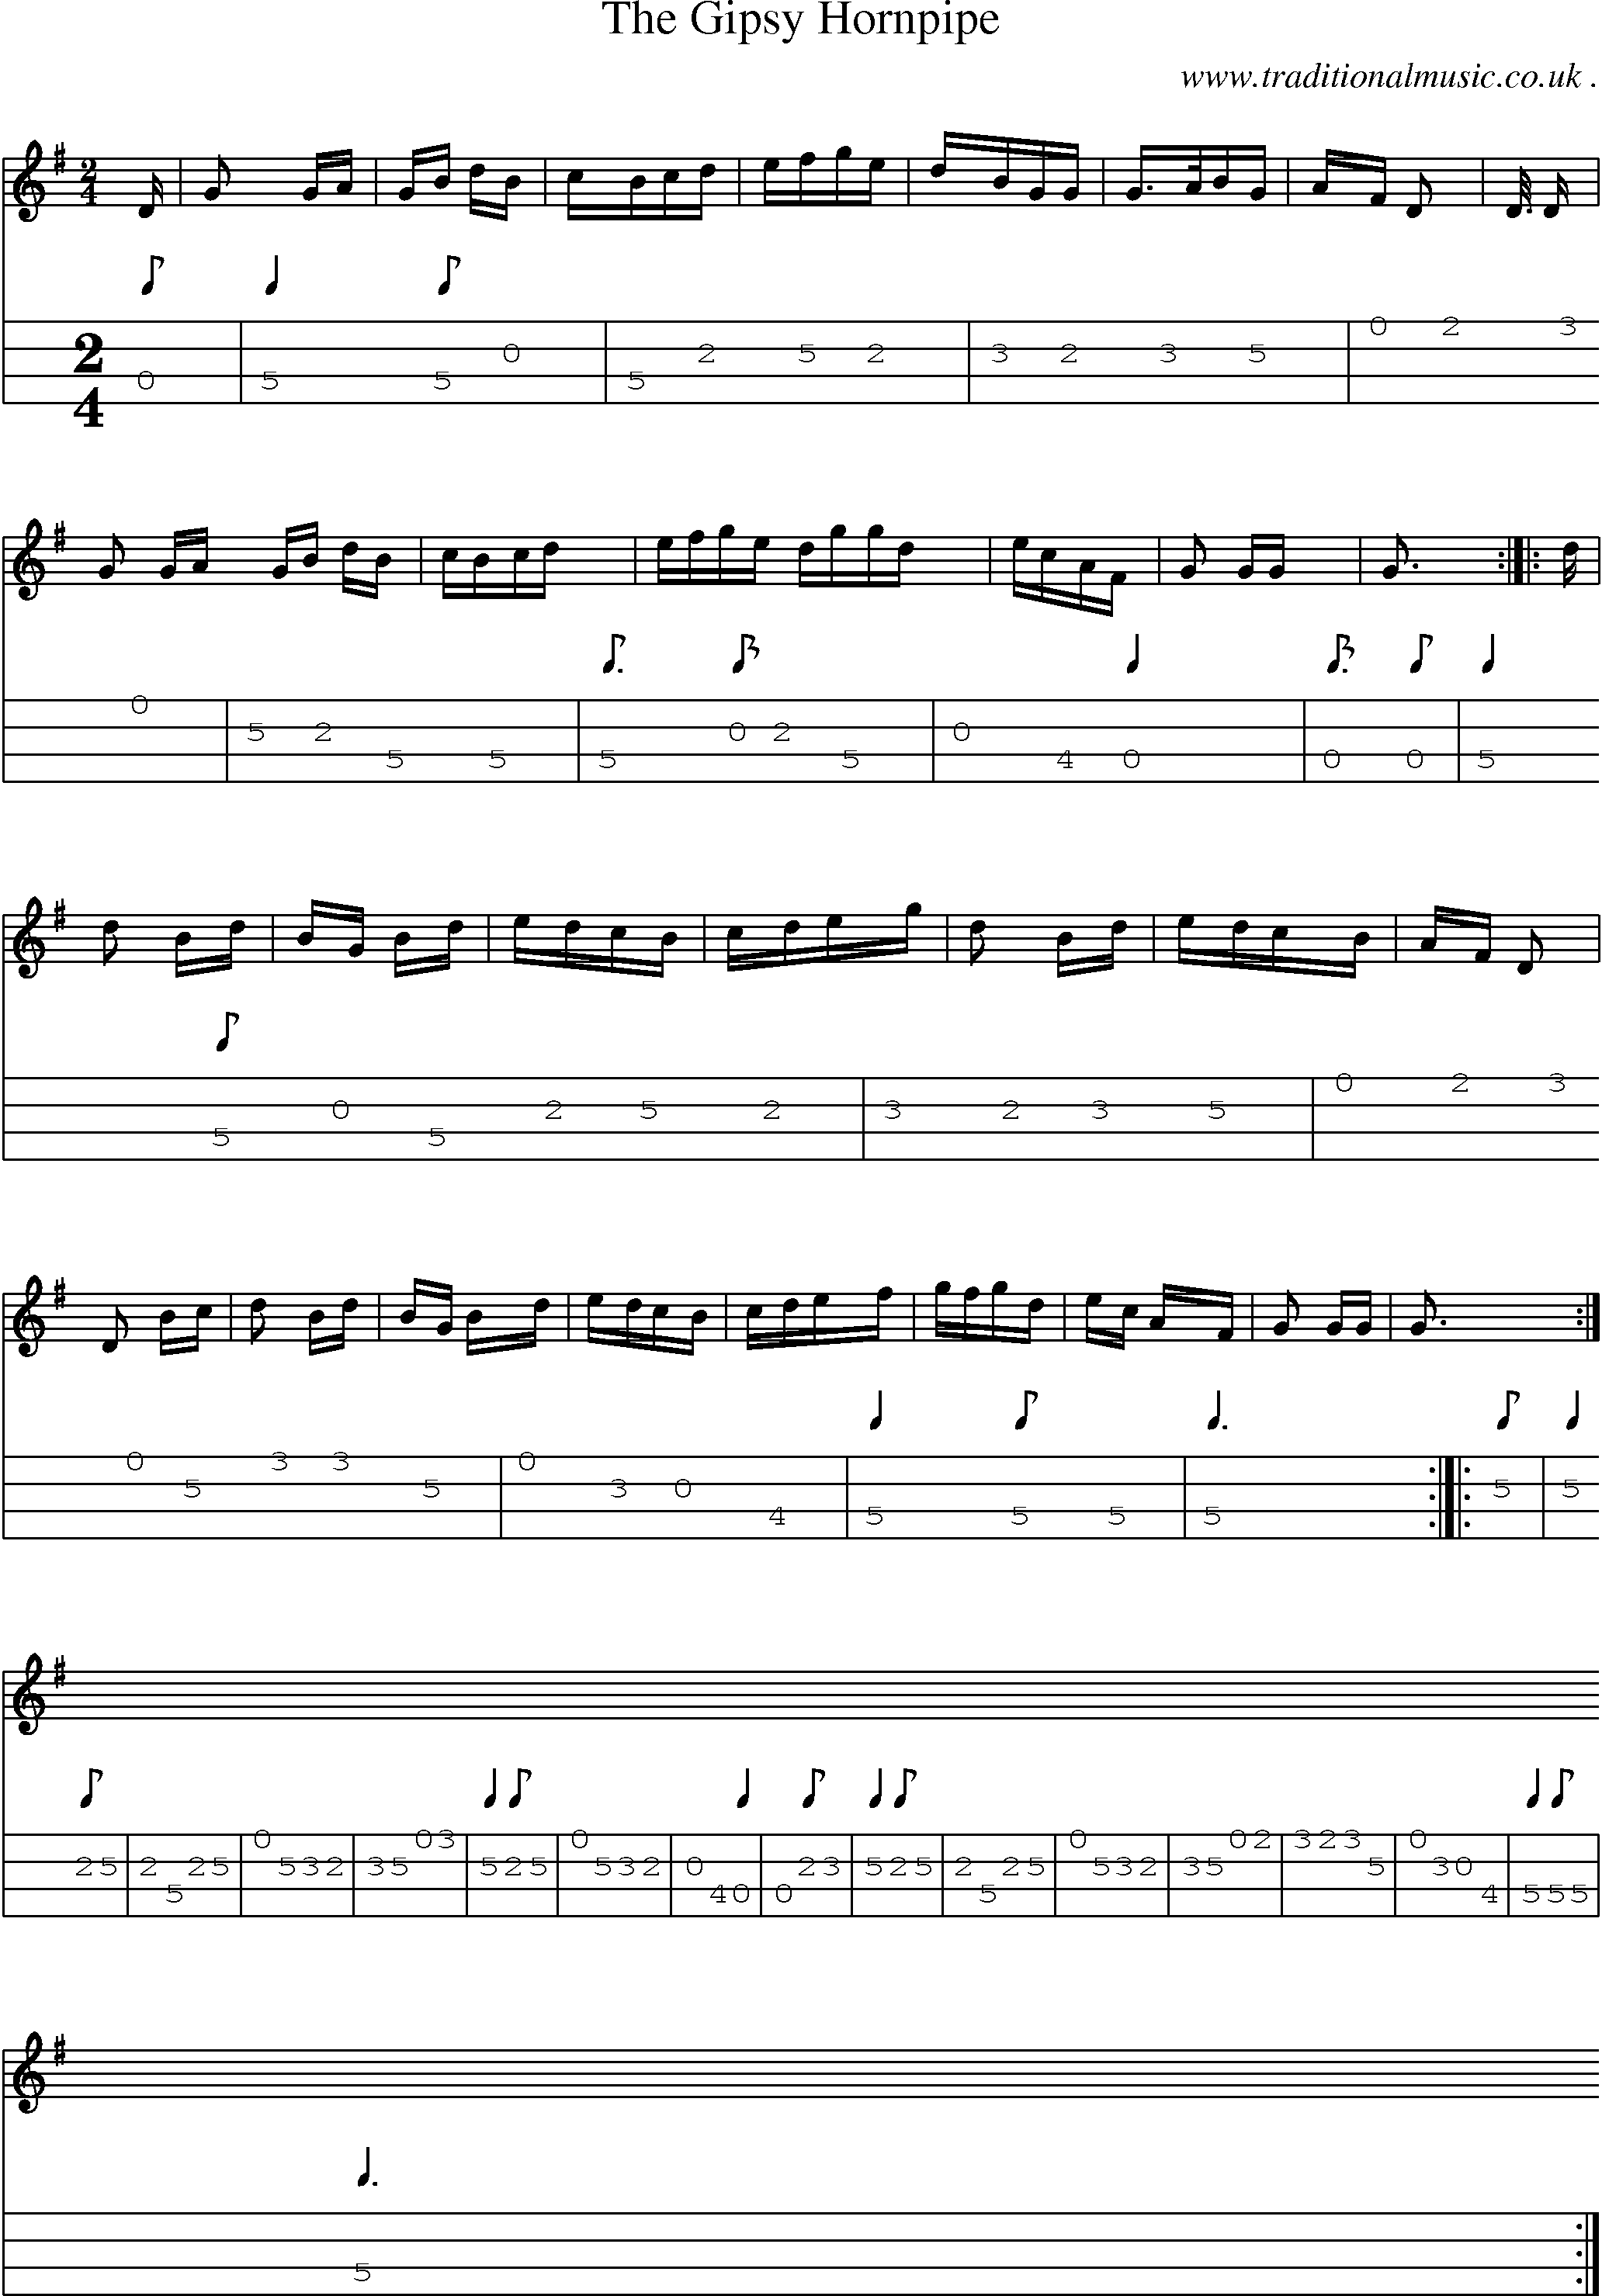 Sheet-Music and Mandolin Tabs for The Gipsy Hornpipe